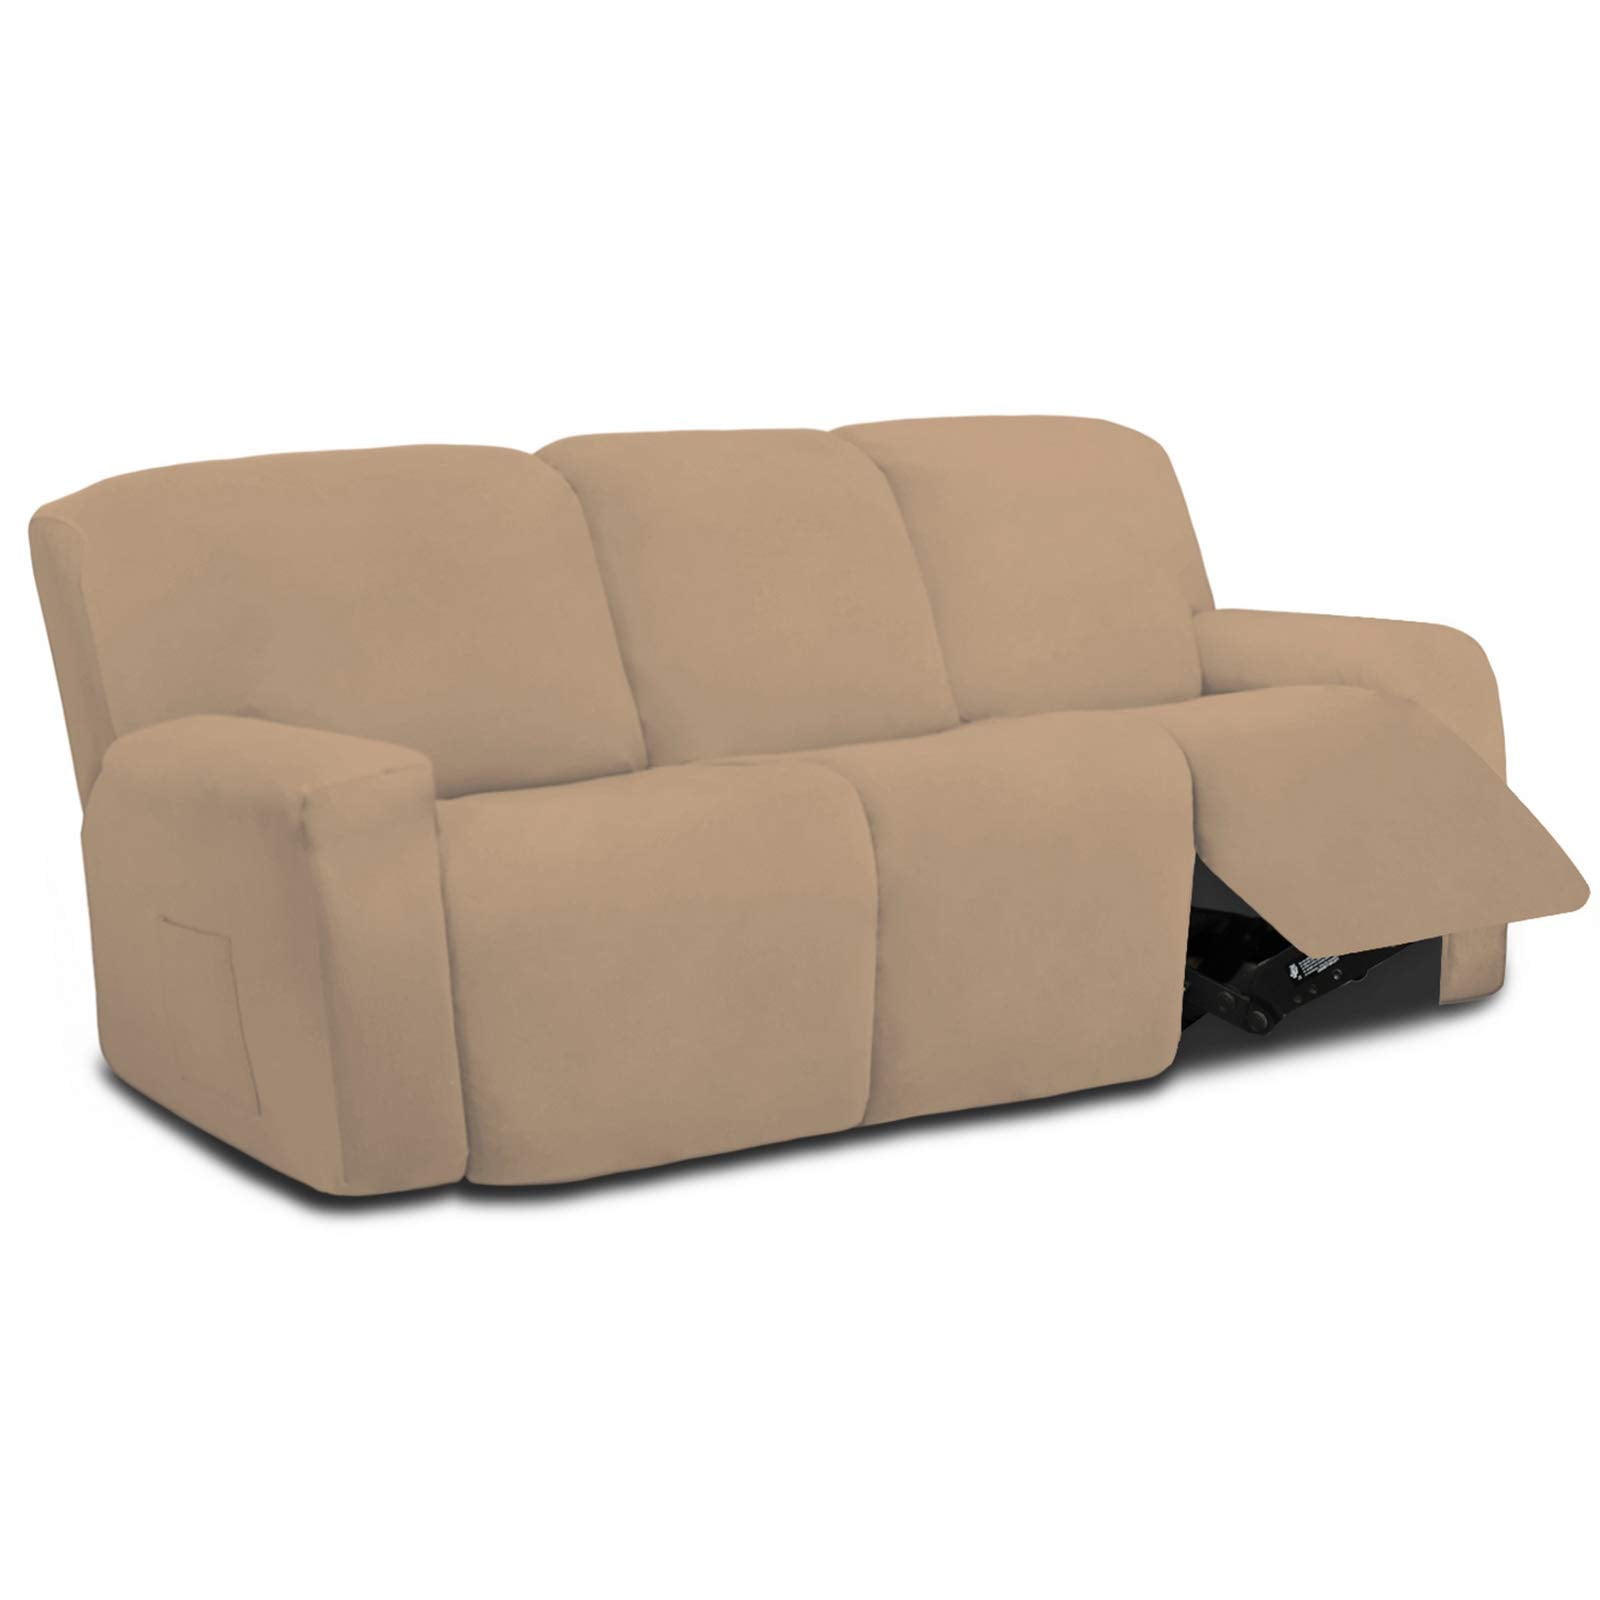 Easy Going Stretch Recliner Sofa, Slipcovers For Recliner Sofa And Loveseat